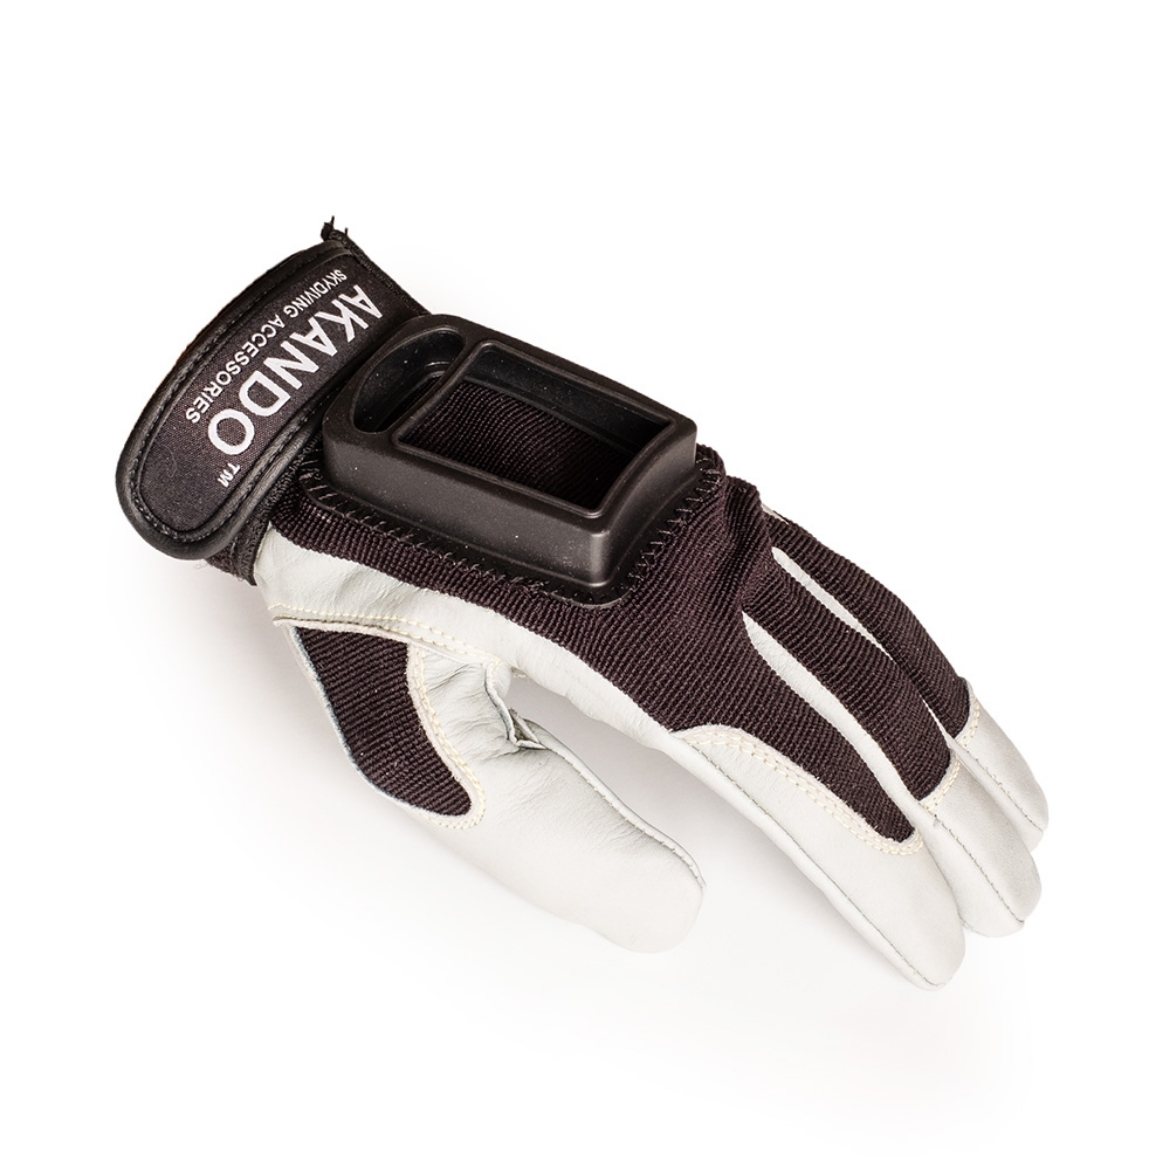 Picture of Akando Ultimate L&B ALFA -ARES Gloves